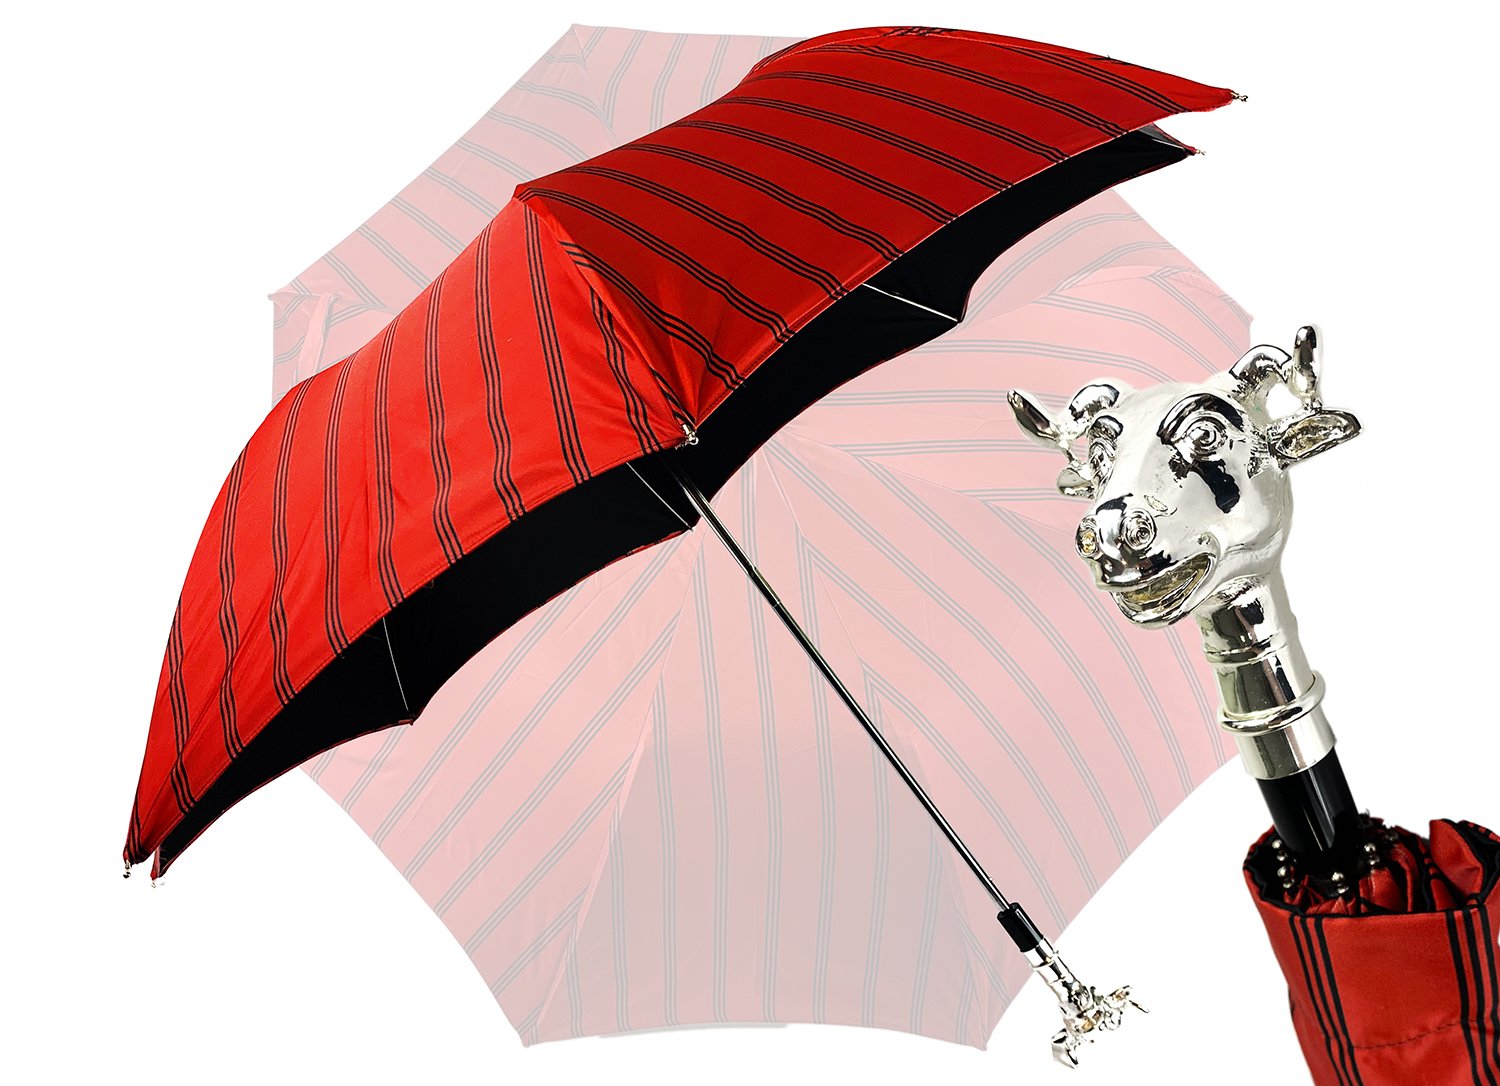 Folding Umbrella for Men with Silver-plated Bull Handle - IL MARCHESATO LUXURY UMBRELLAS, CANES AND SHOEHORNS